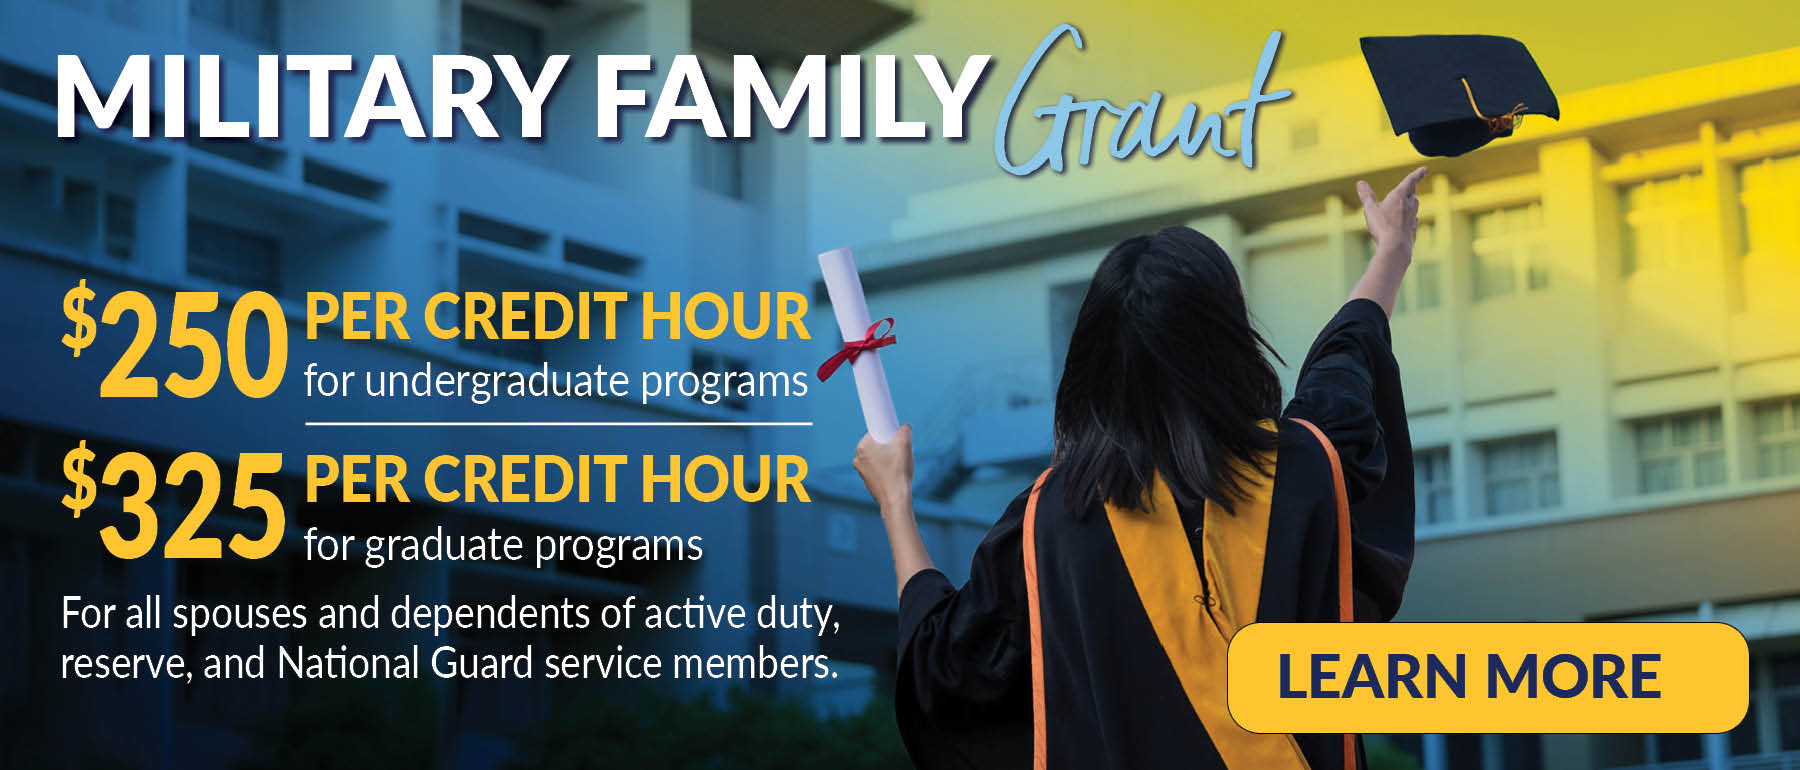 Military Family Grant Graphic 250 per credit hour for undergraduate programs and 325 for graduate